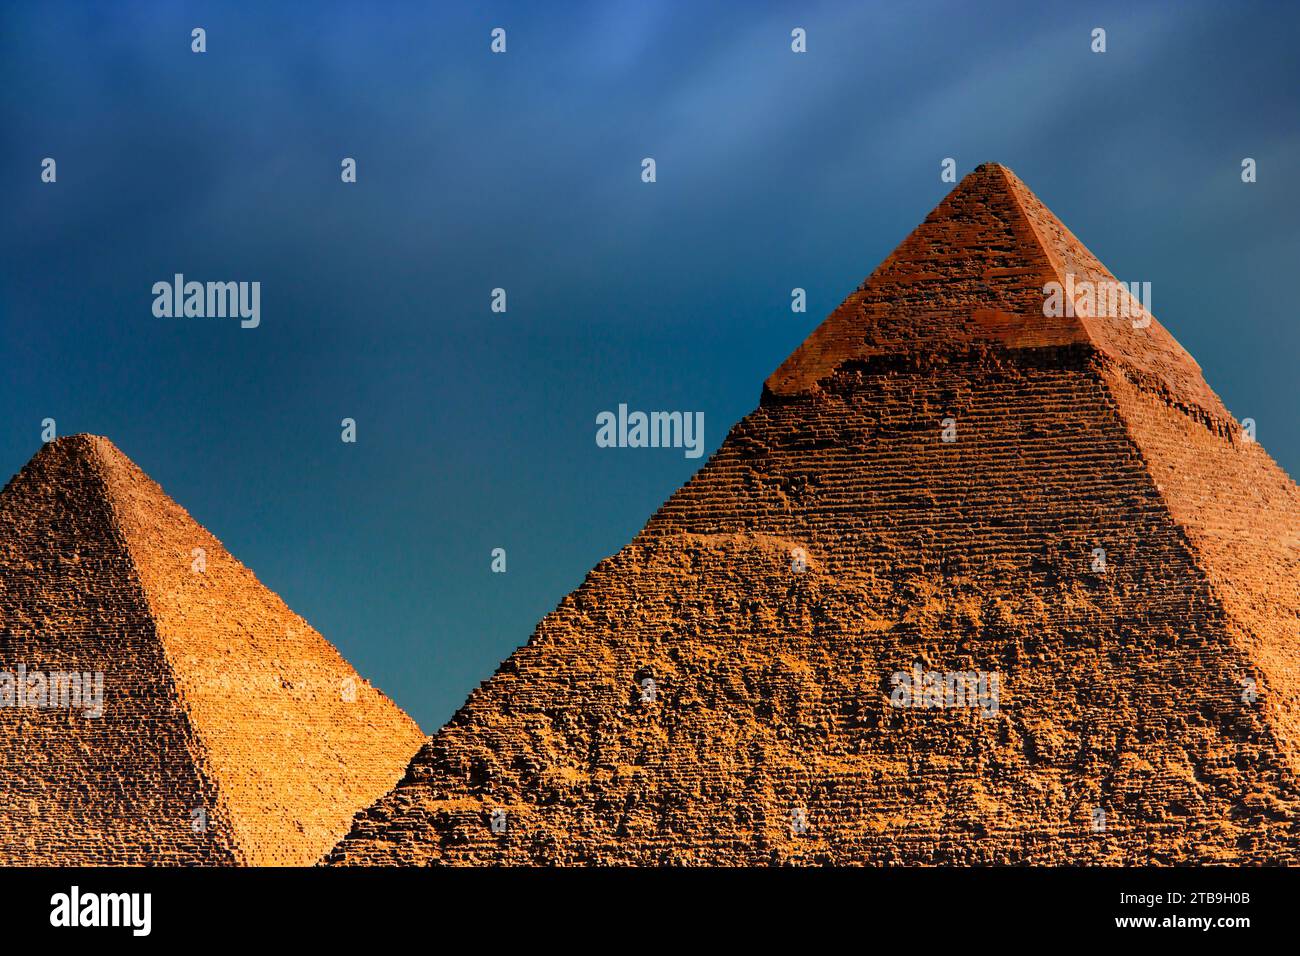 Two of the primary Pyramids of Giza, sunlit with a golden hue, the Great Pyramid (Khufu) under a dark, cloudy sky; Giza, Egypt Stock Photo